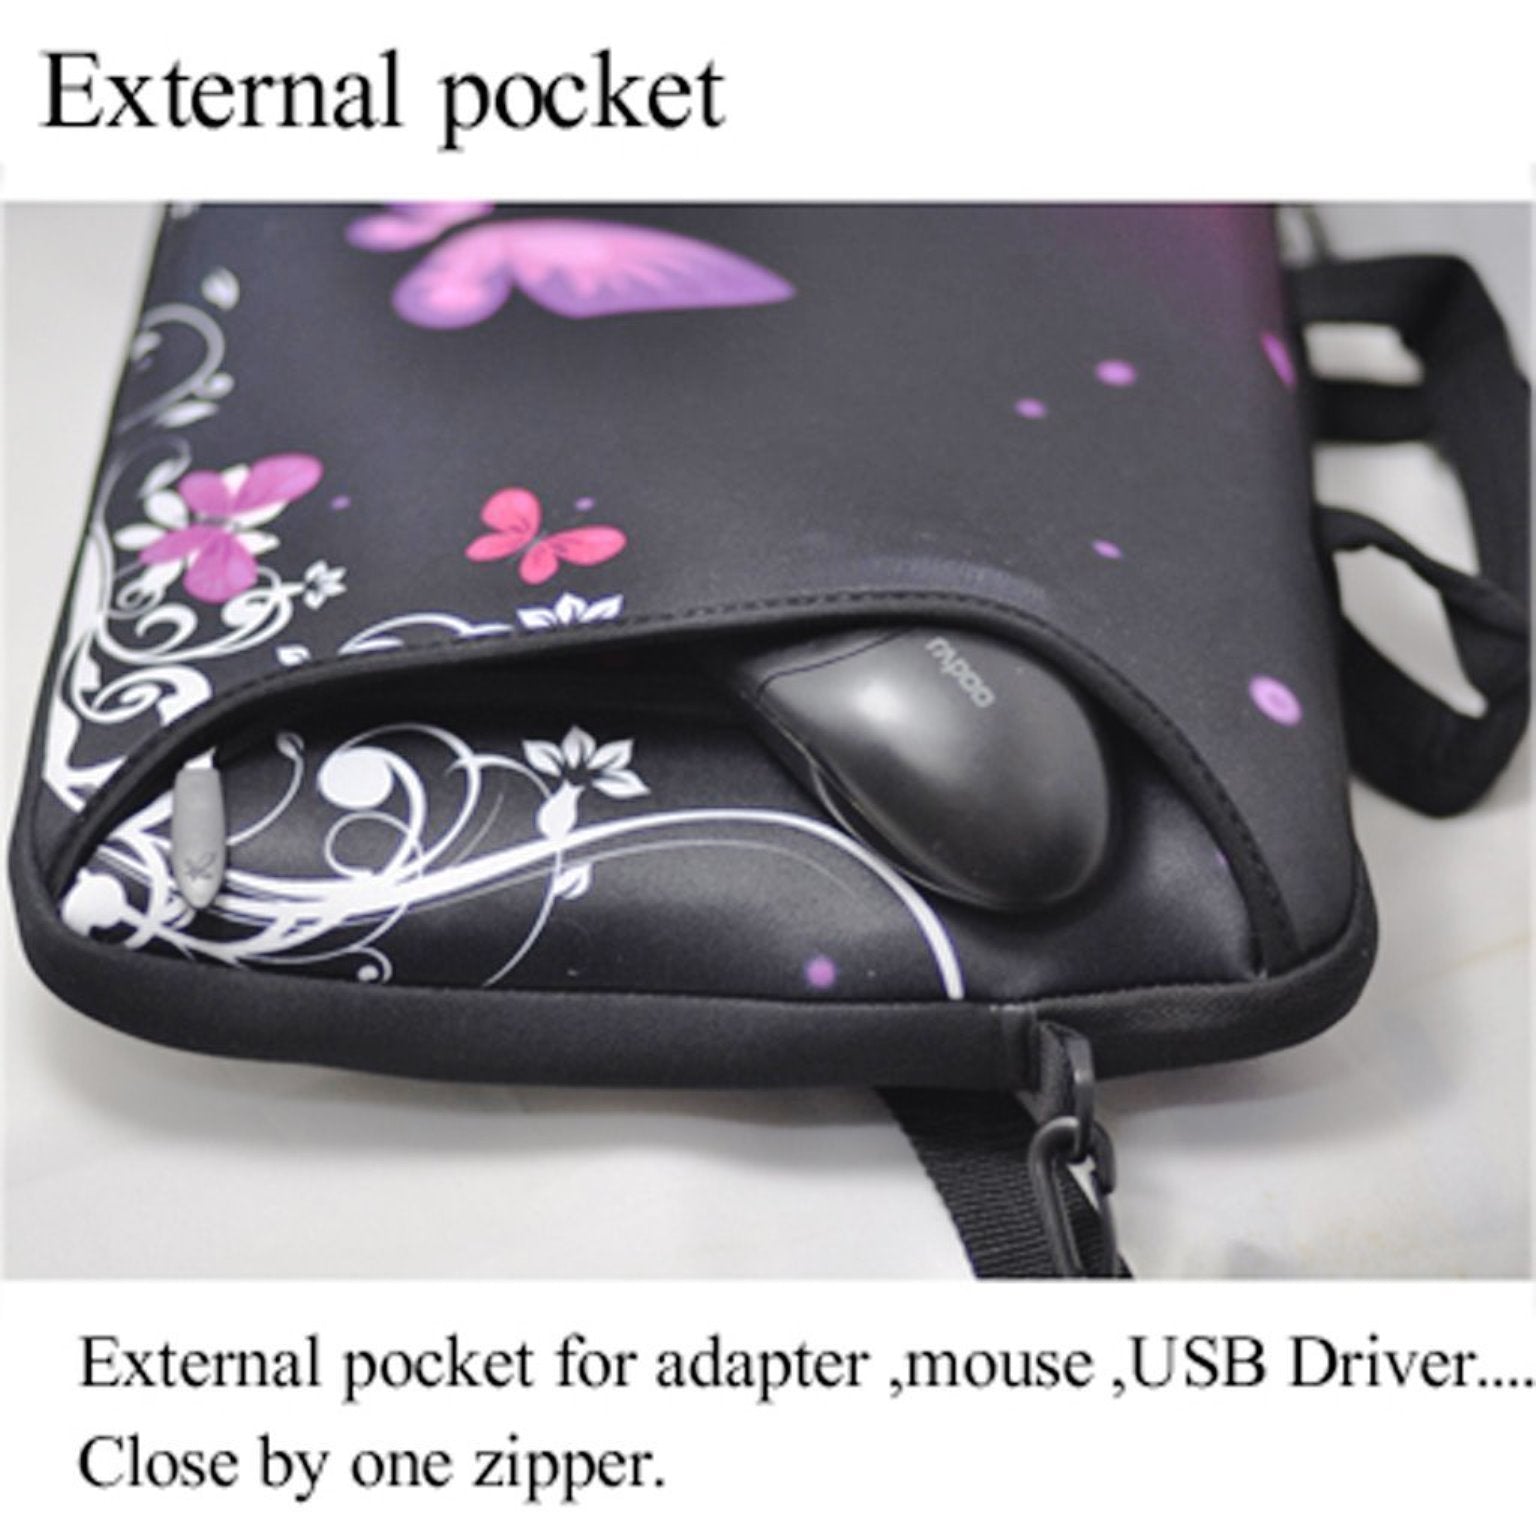 17"- 17.3" (inch) LAPTOP BAG/CASE WITH HANDLE & STRAP, NEOPRENE MADE FOR LAPTOPS/NOTEBOOKS, ZIPPED*FLOWER & BUTTERFLIES*